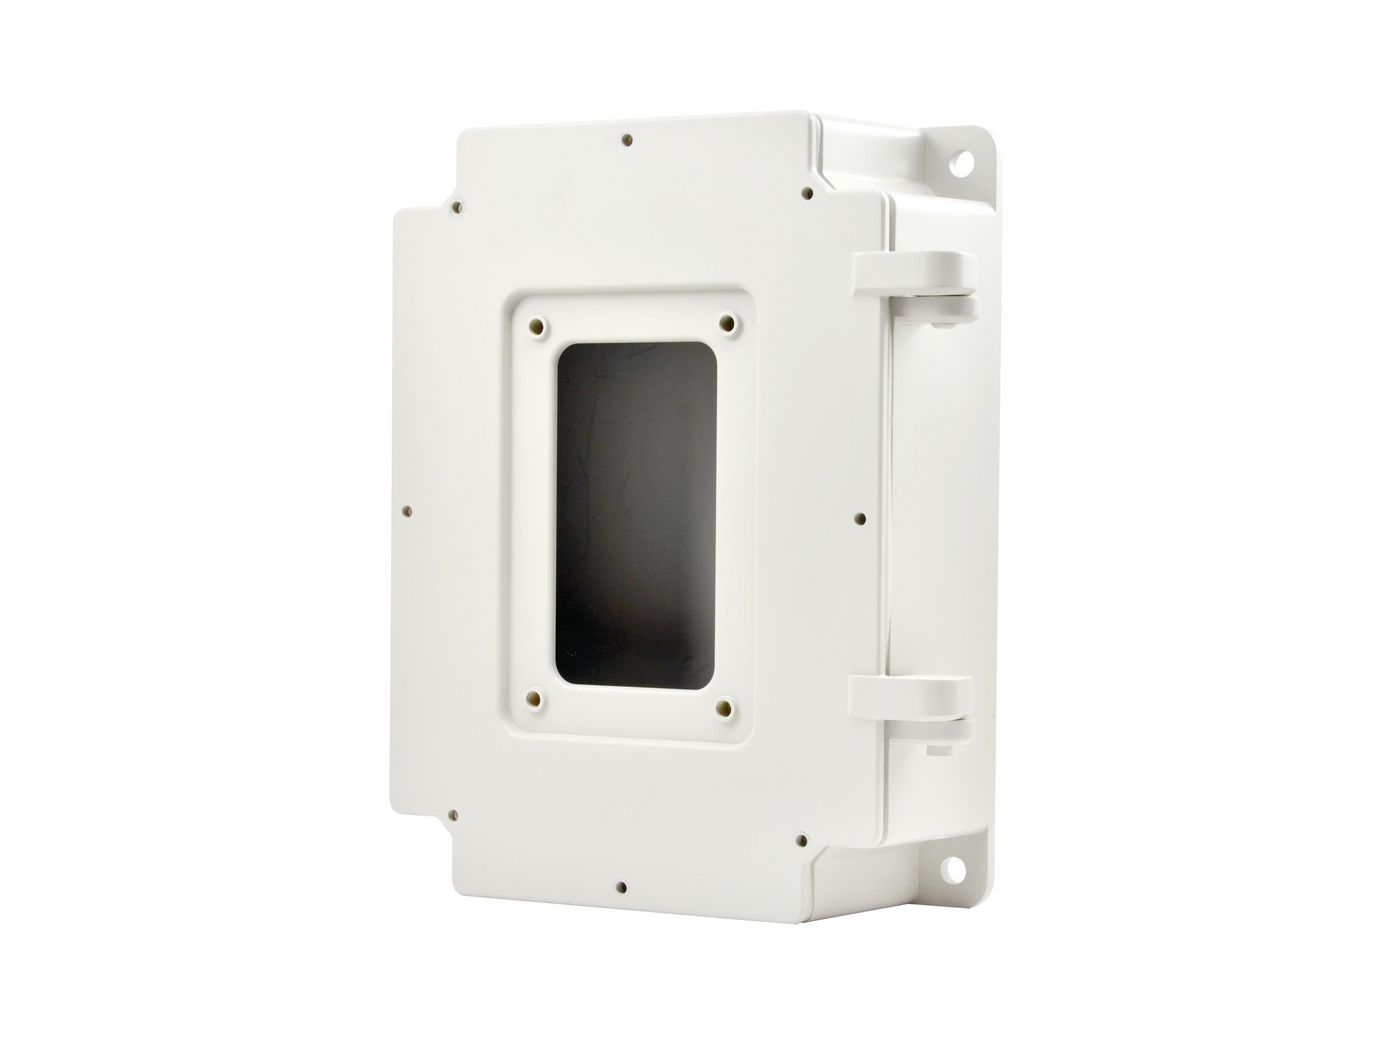 LevelOne CAS-2702 OUTDOOR JUNCTION BOX 